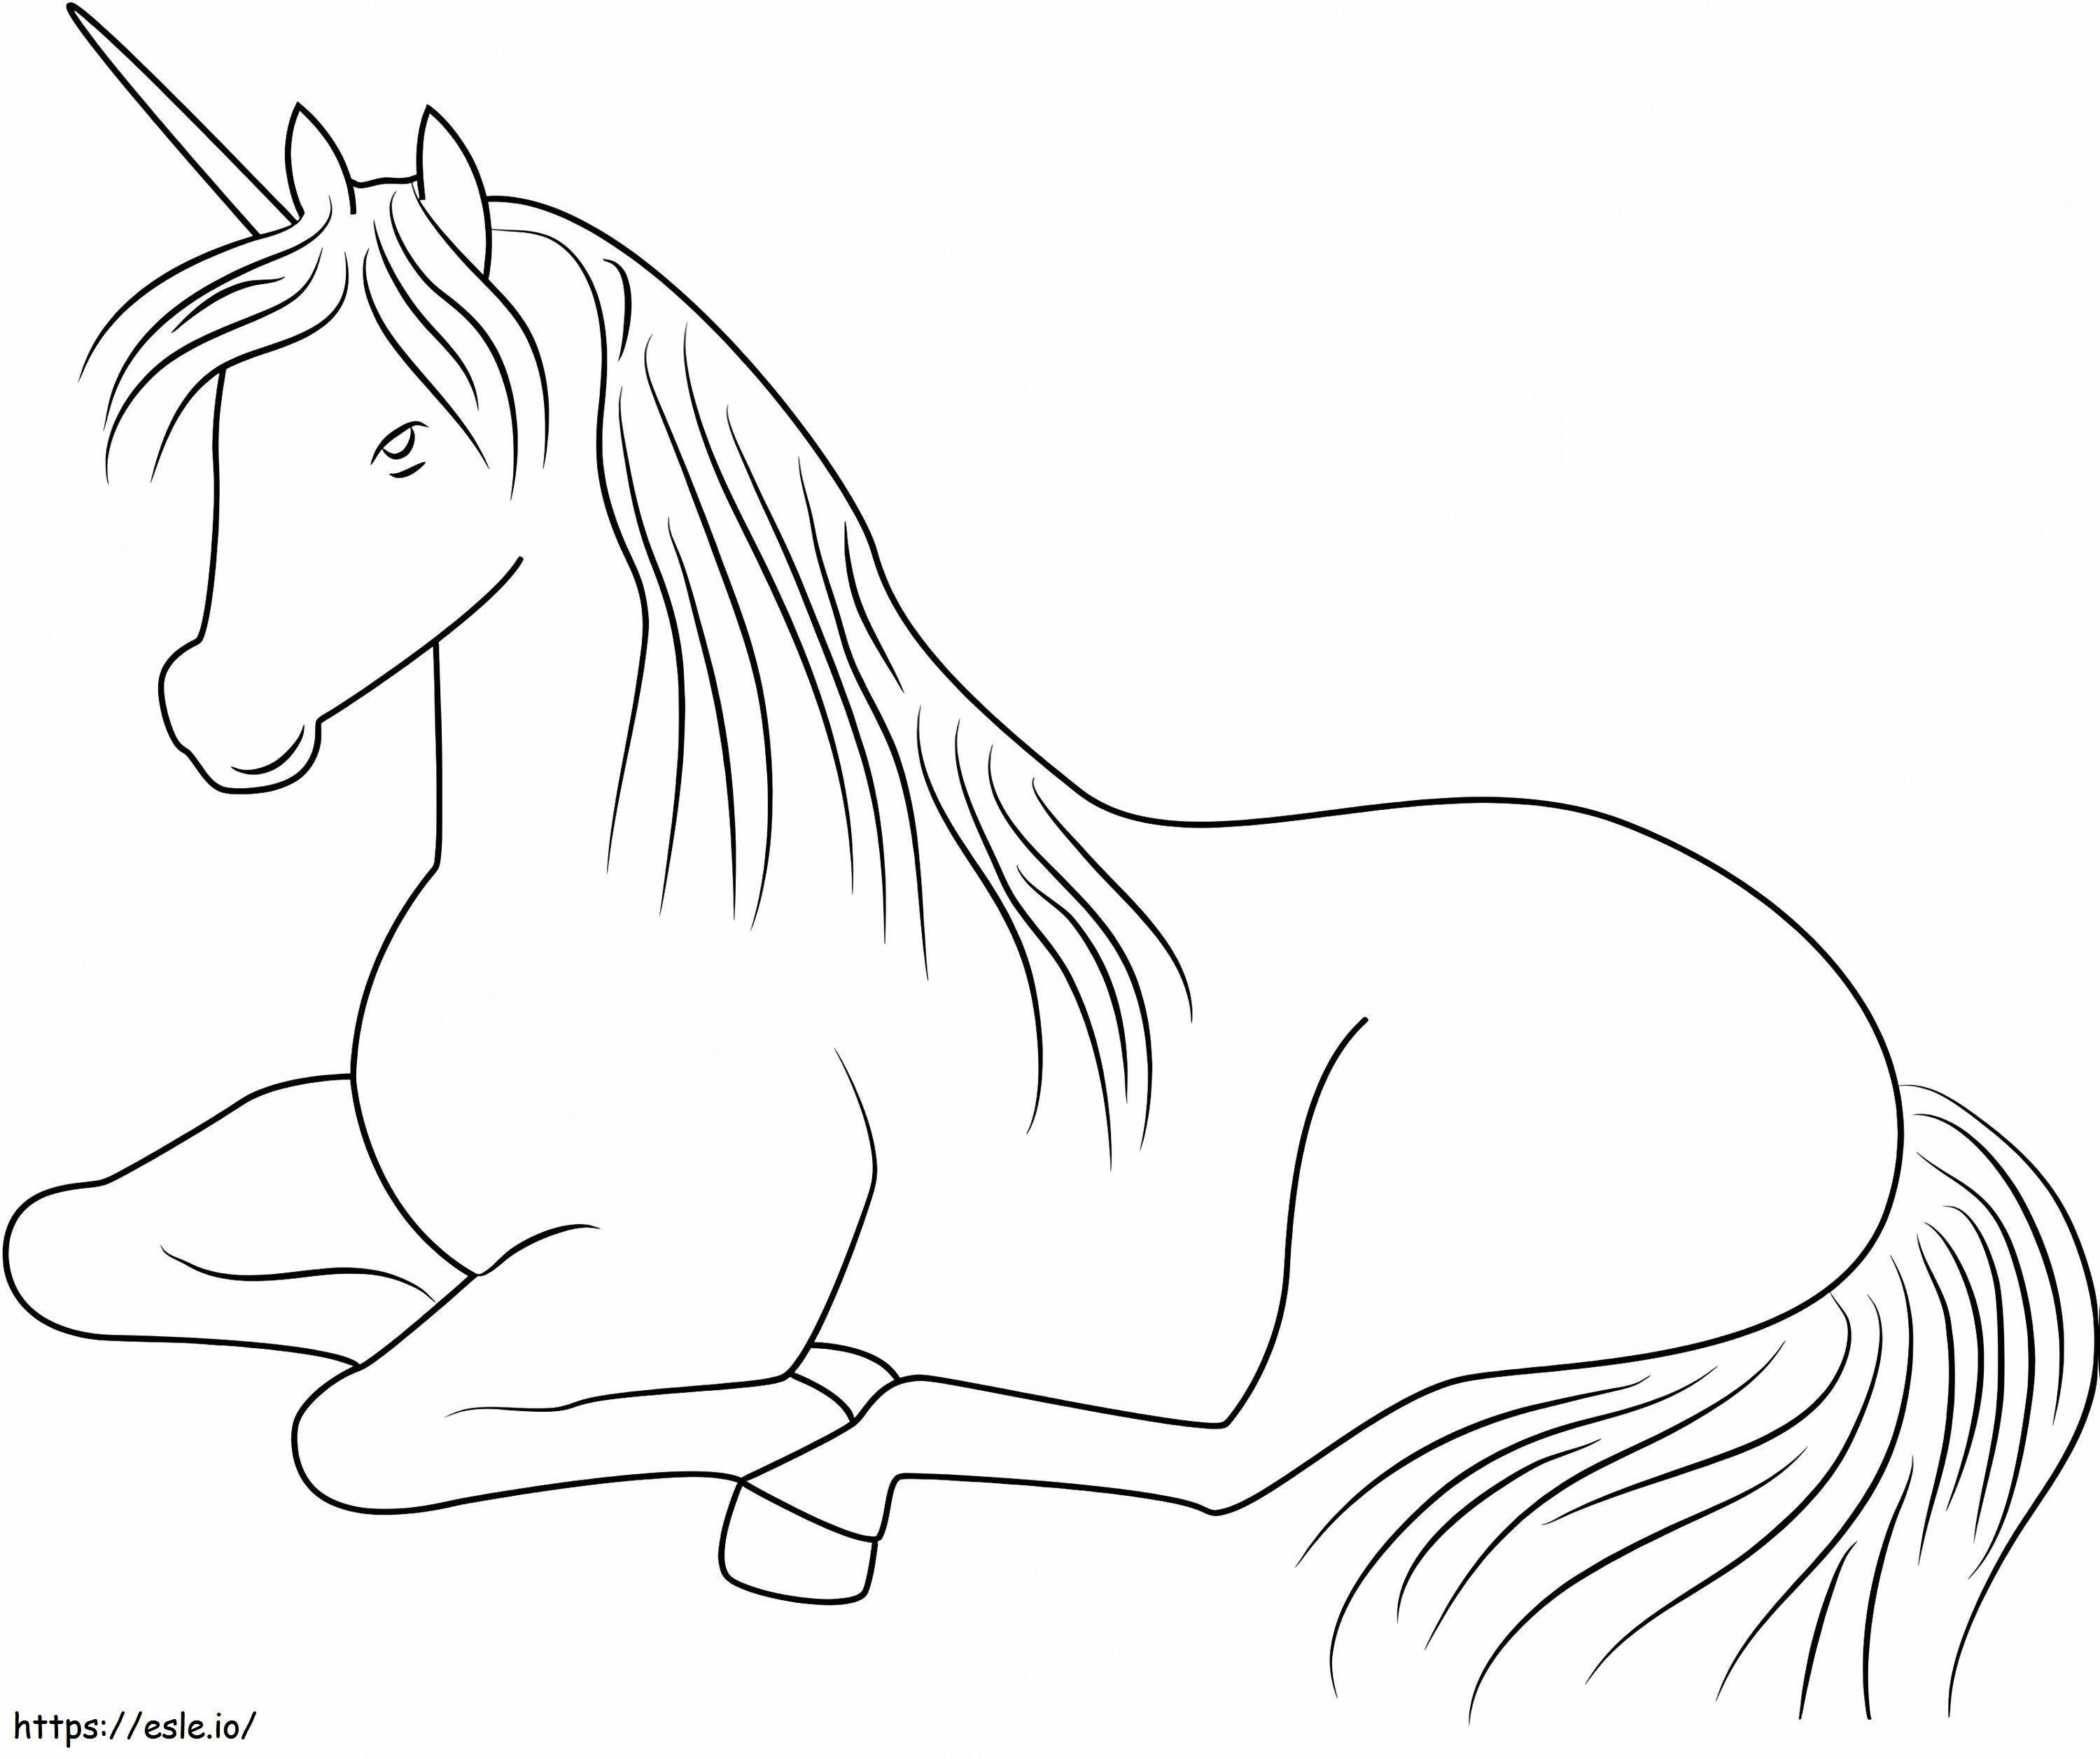 1529982256_6 coloring page